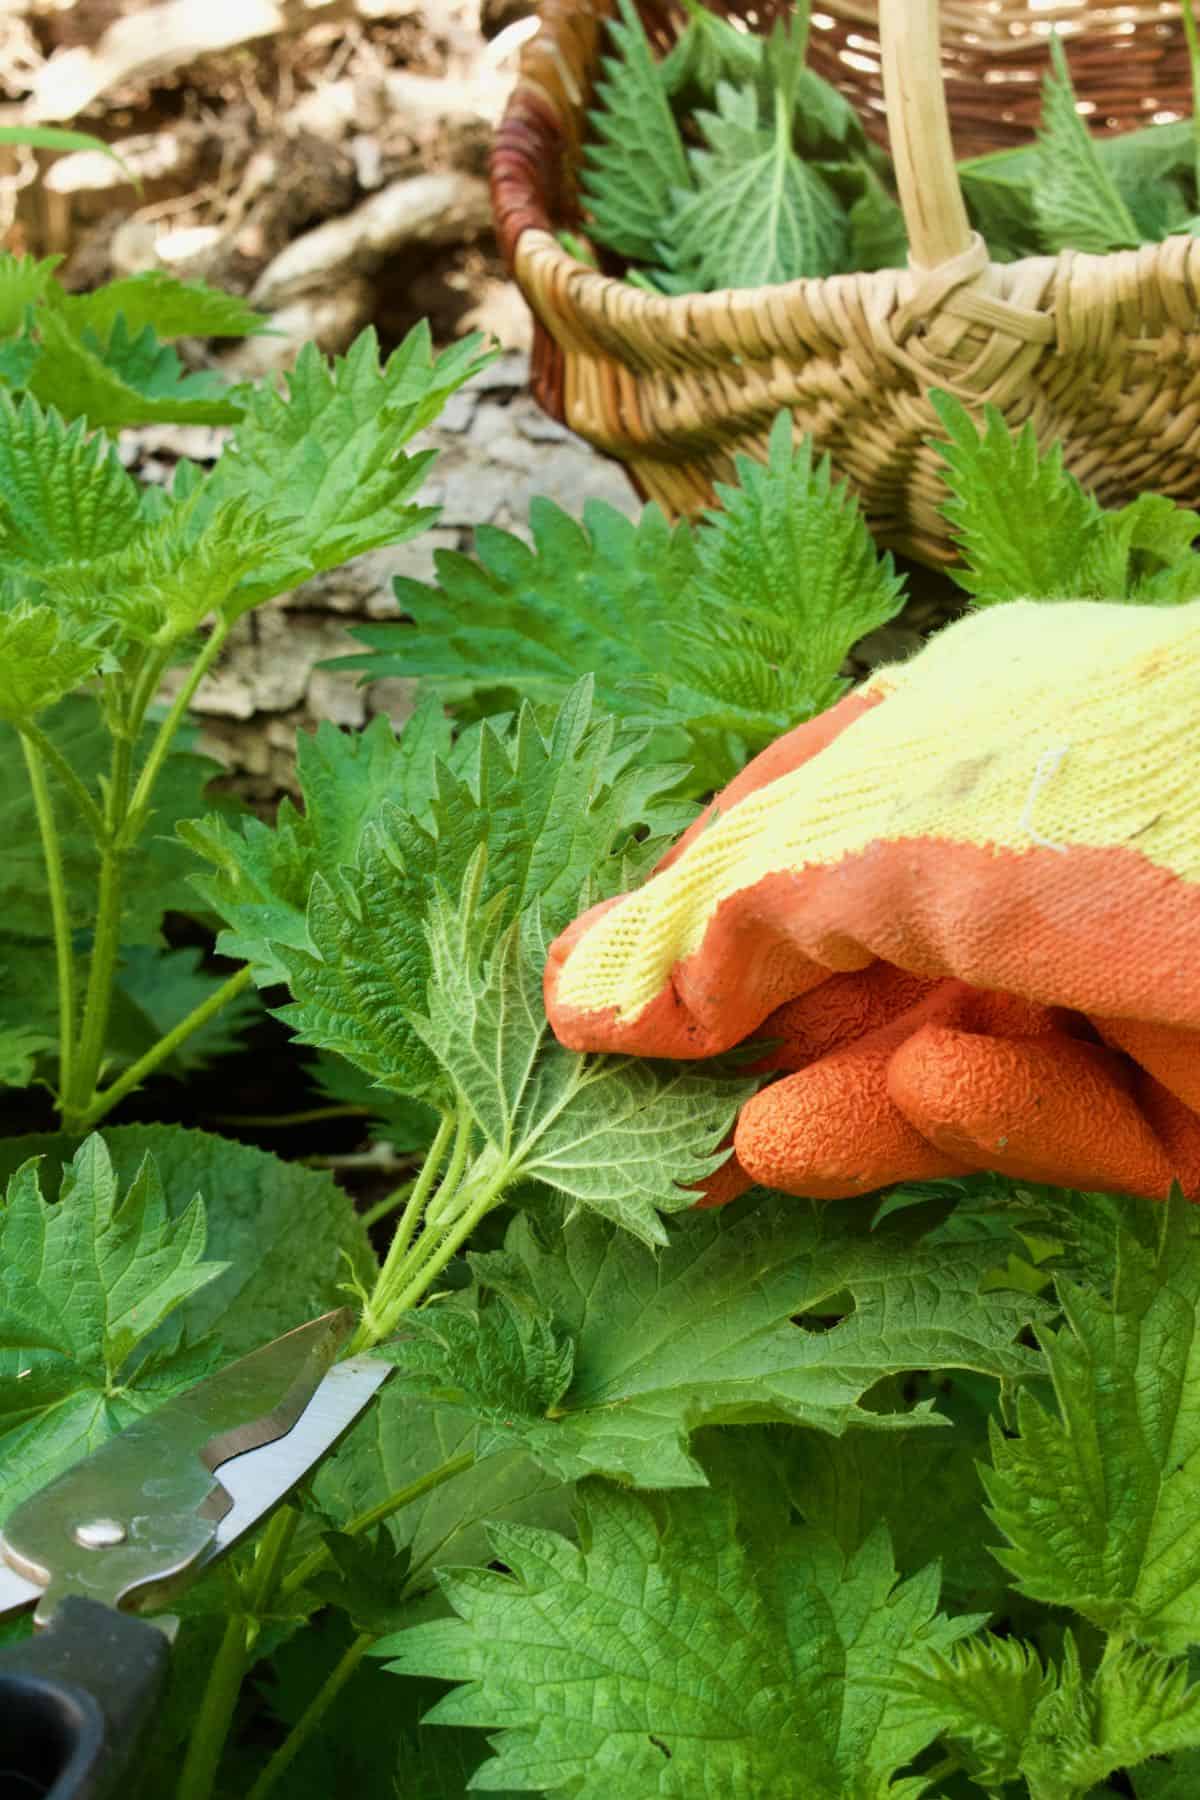 Cutting the top leaves of a nettle plant with gloves and a pair of scissors.